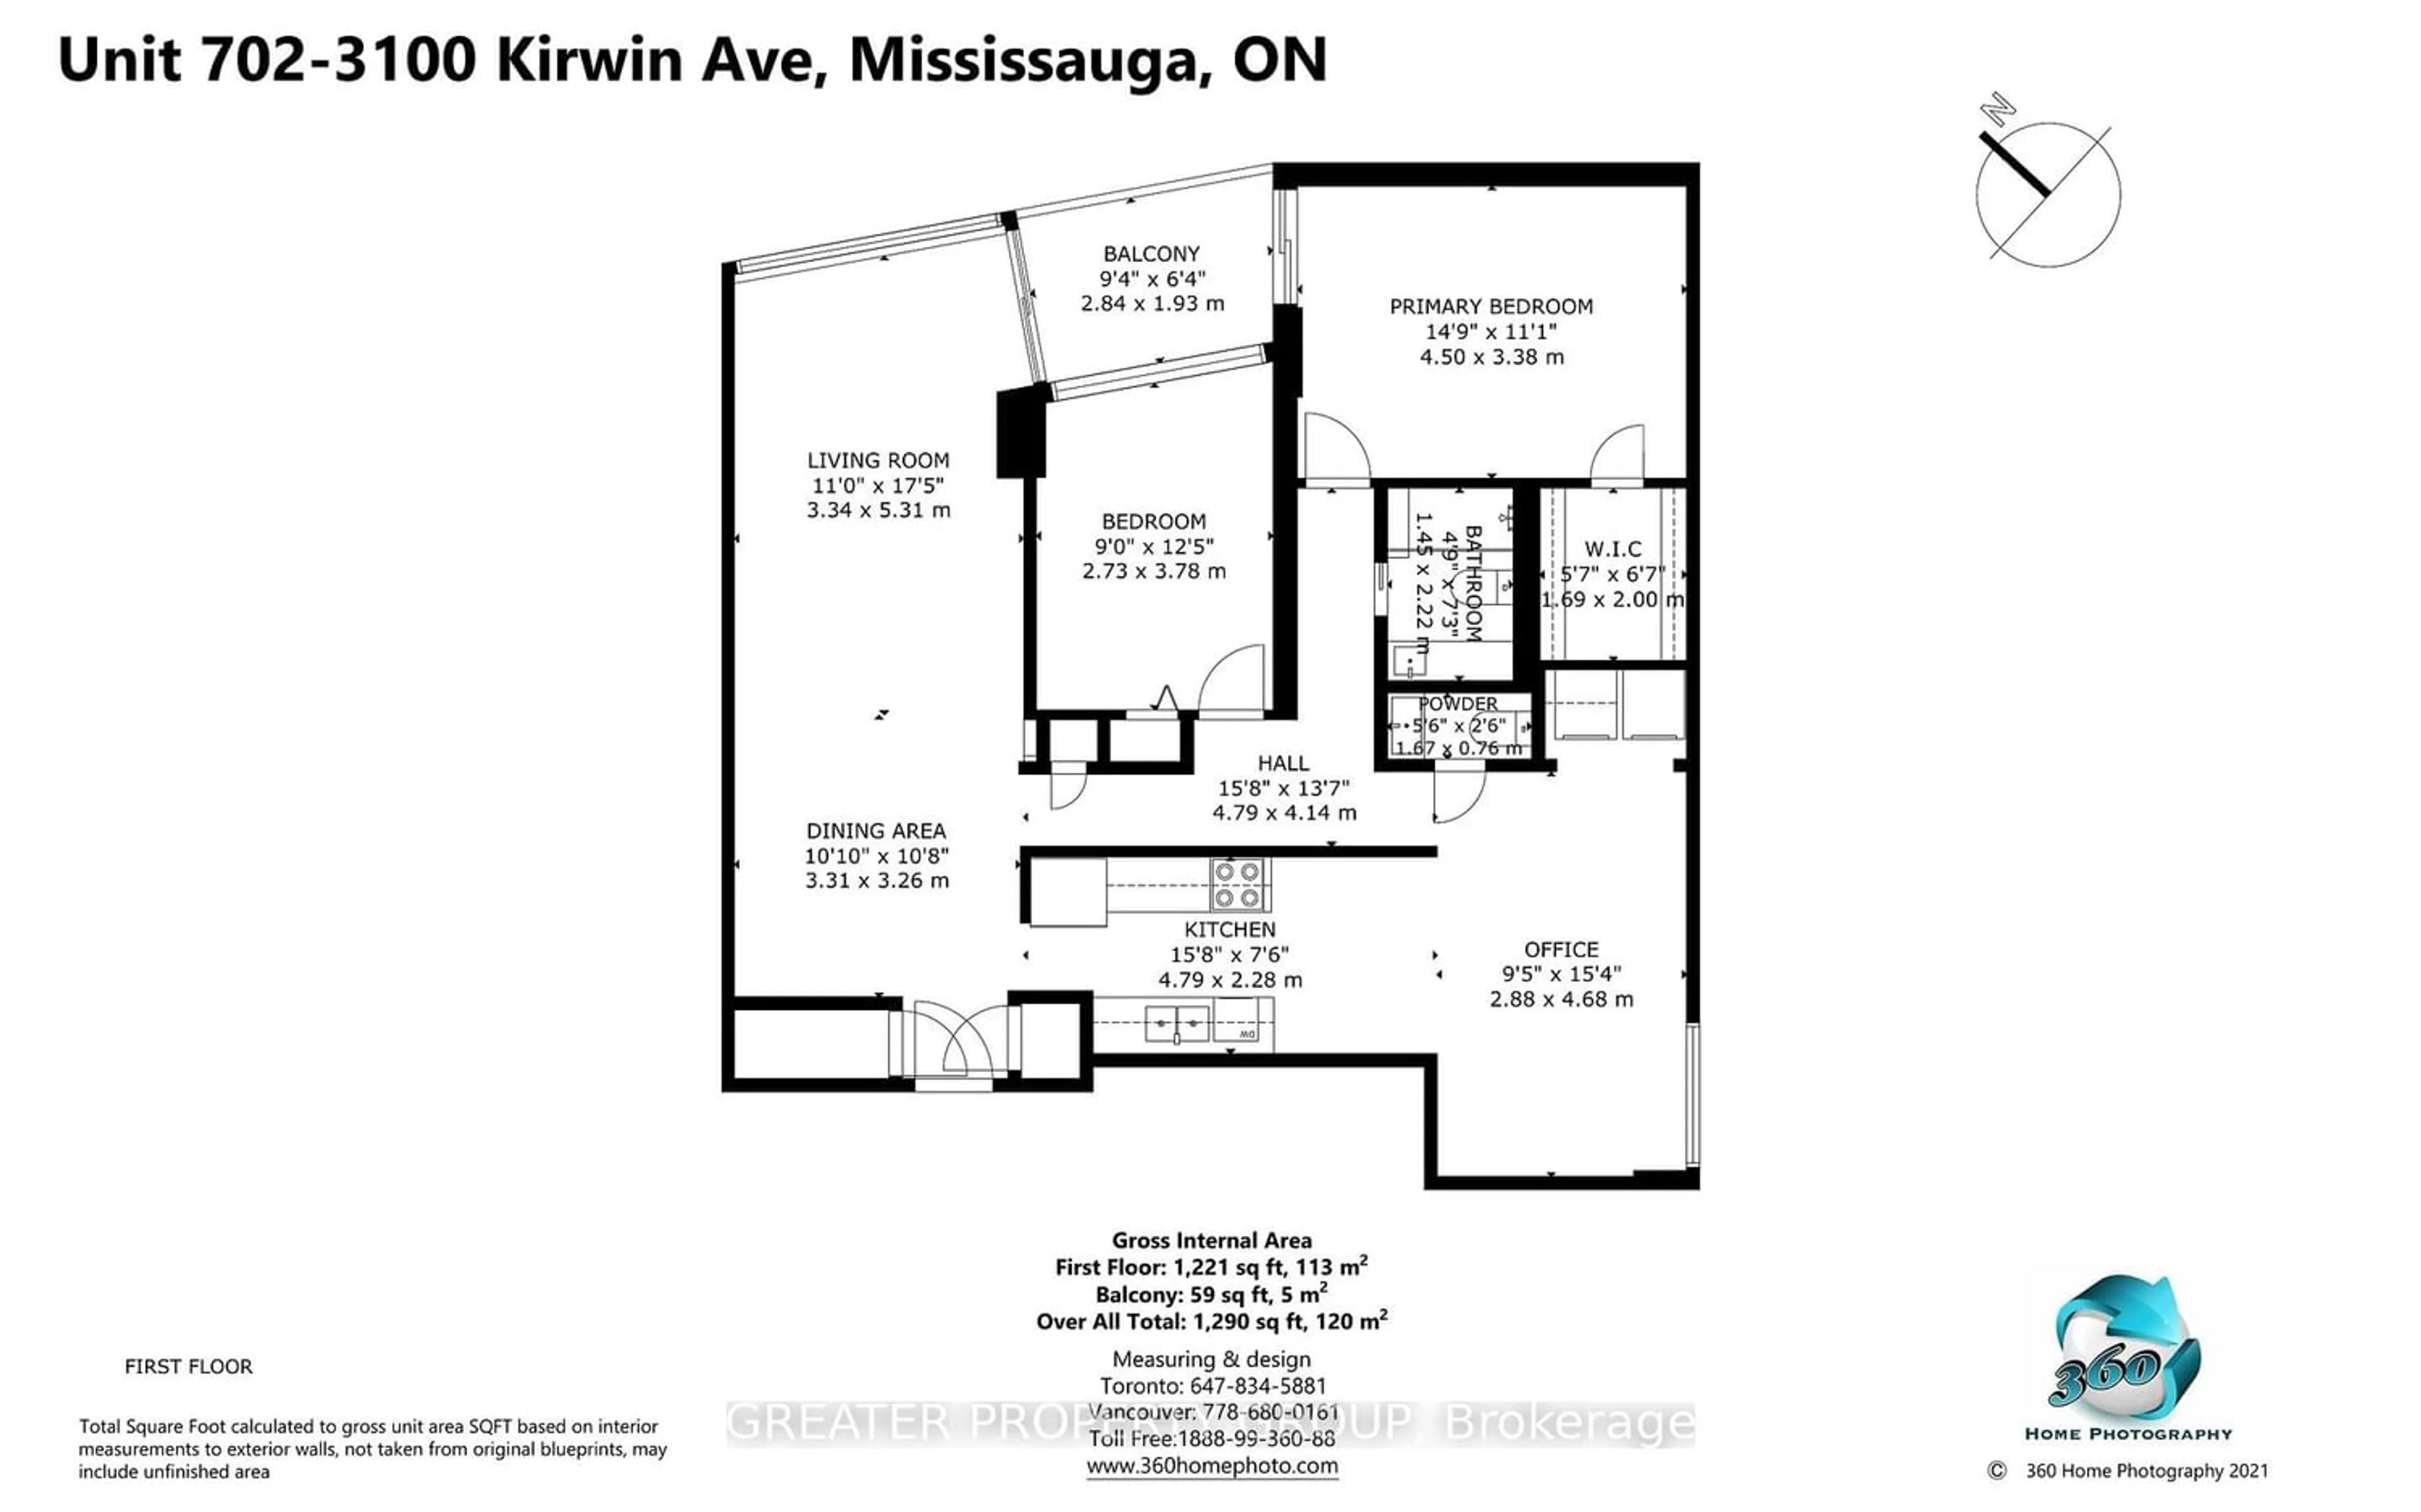 Floor plan for 3100 Kirwin Ave #702, Mississauga Ontario L5A 3S6